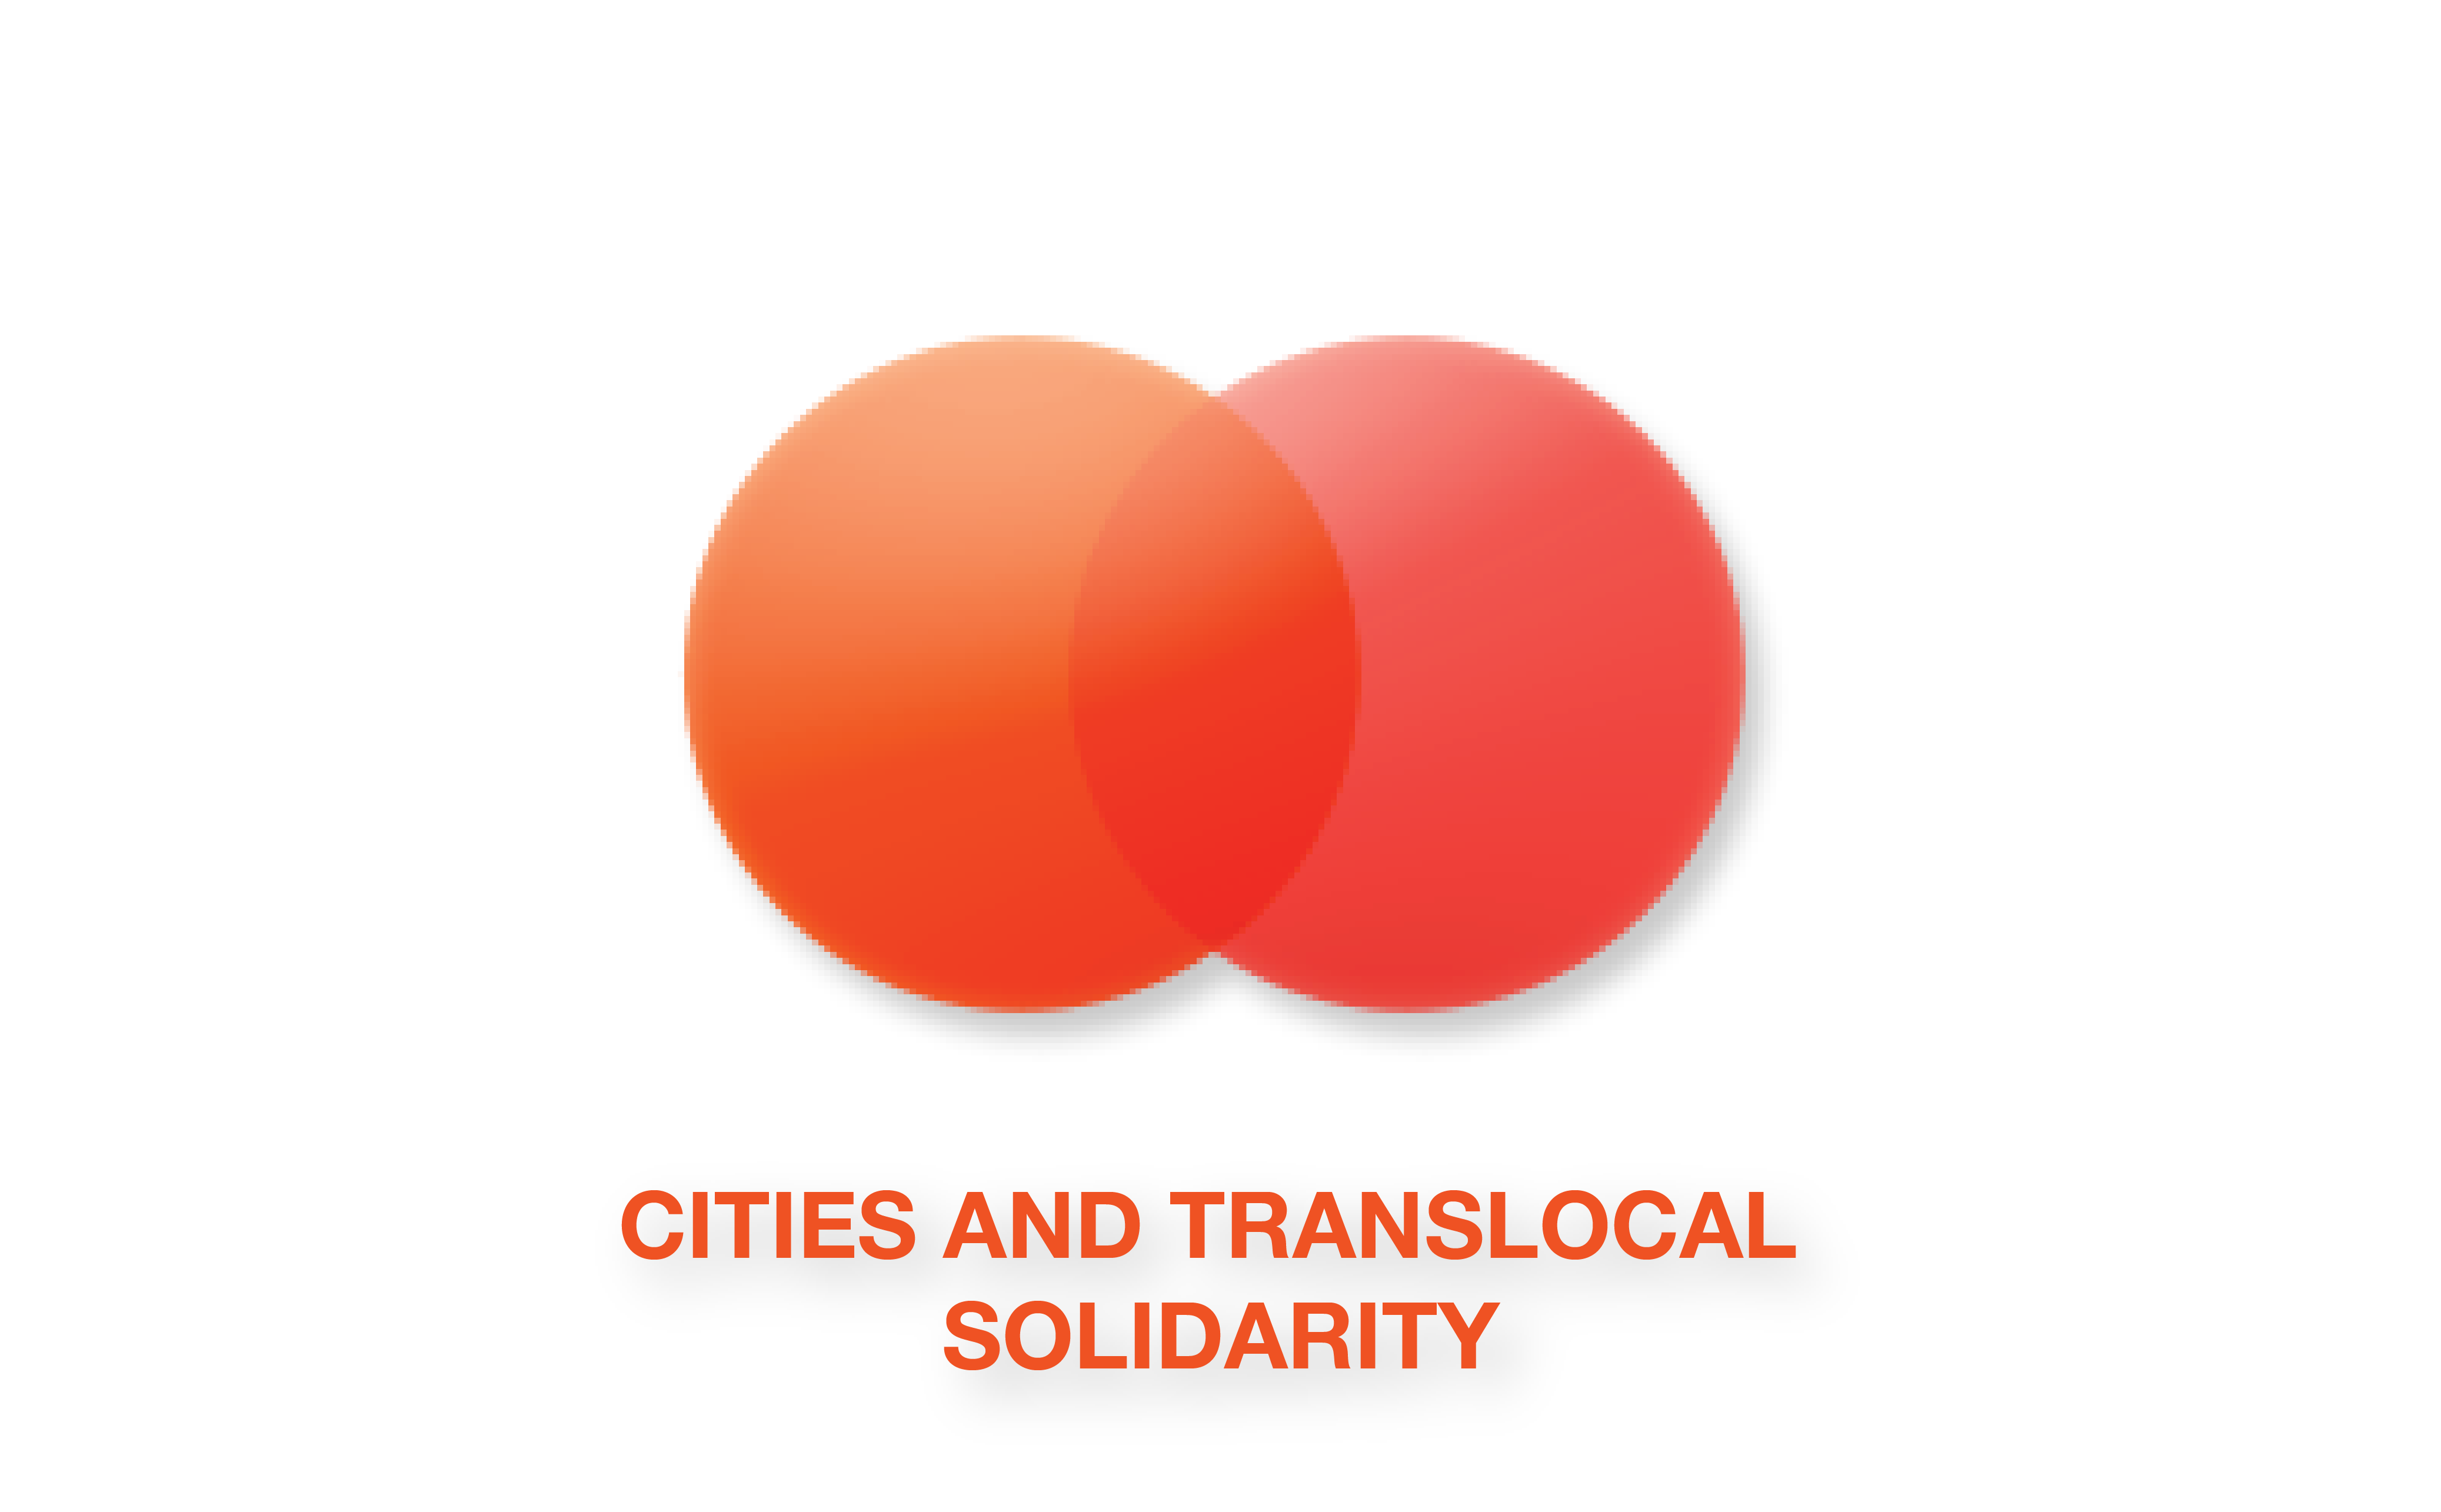 Cities and translocal solidarity